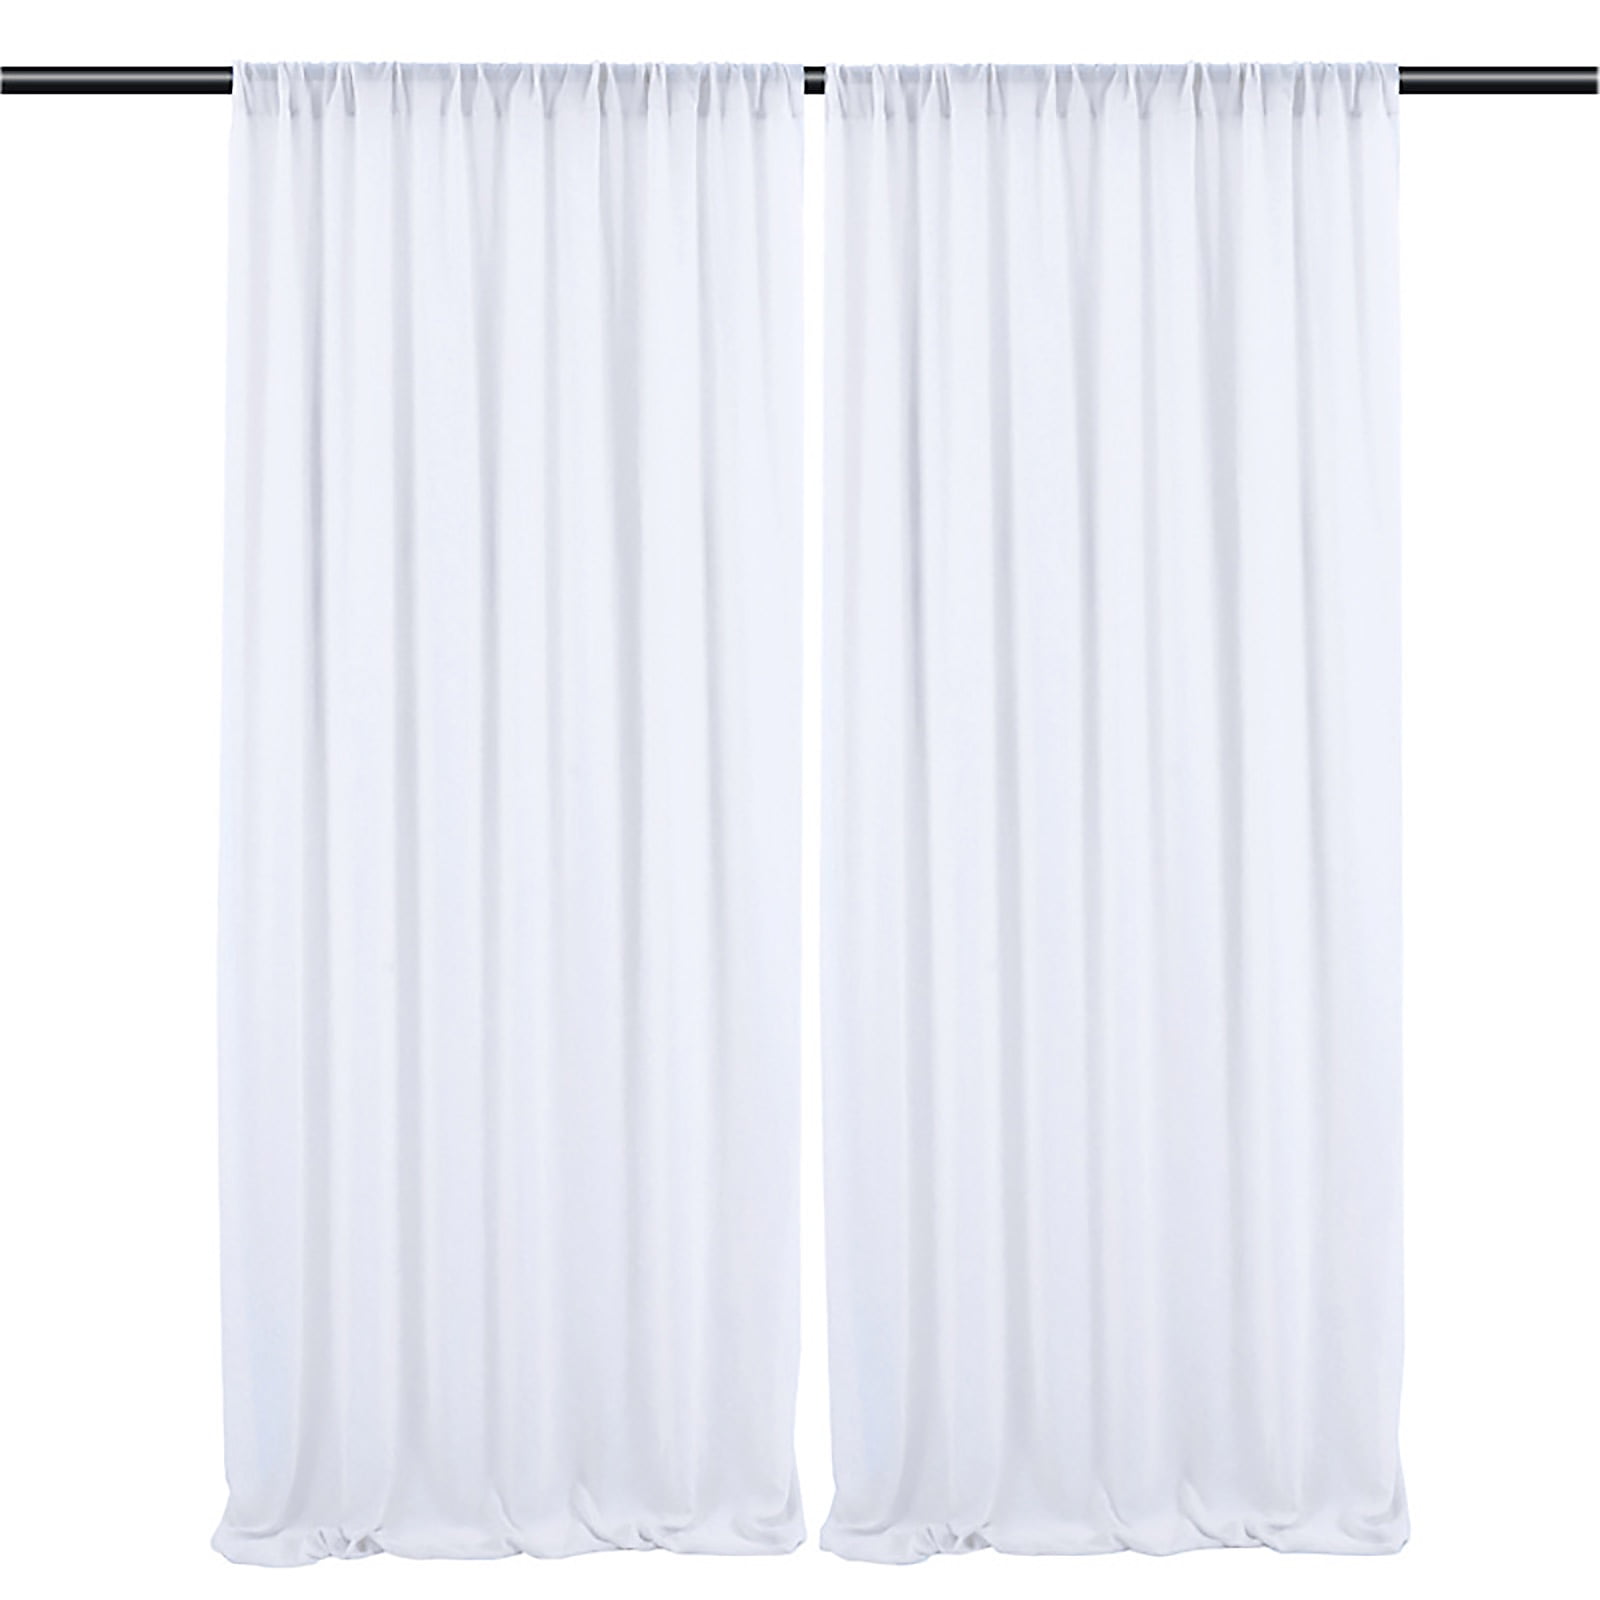 Outdoors Decoration Curtain Multicolor Chiffon 1pcs White Background Live Stage  Engagement Setting Backdrop | Walmart Canada